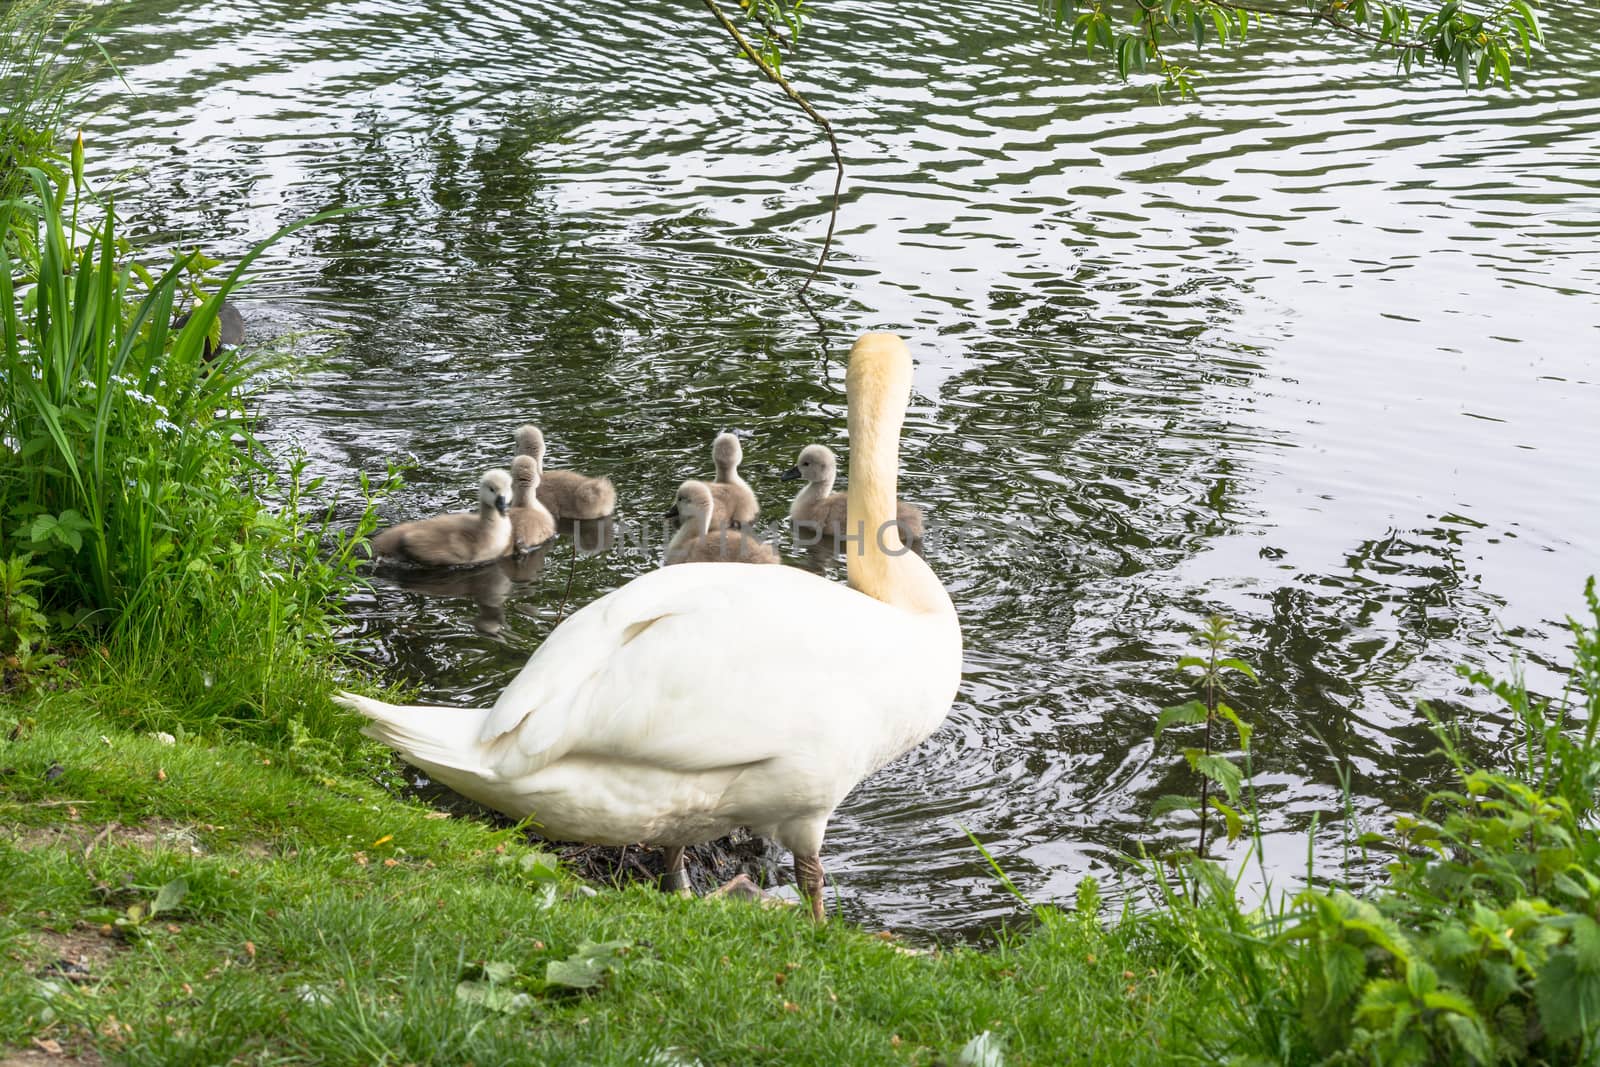 White swan with Cygnets swimming on a pond.

